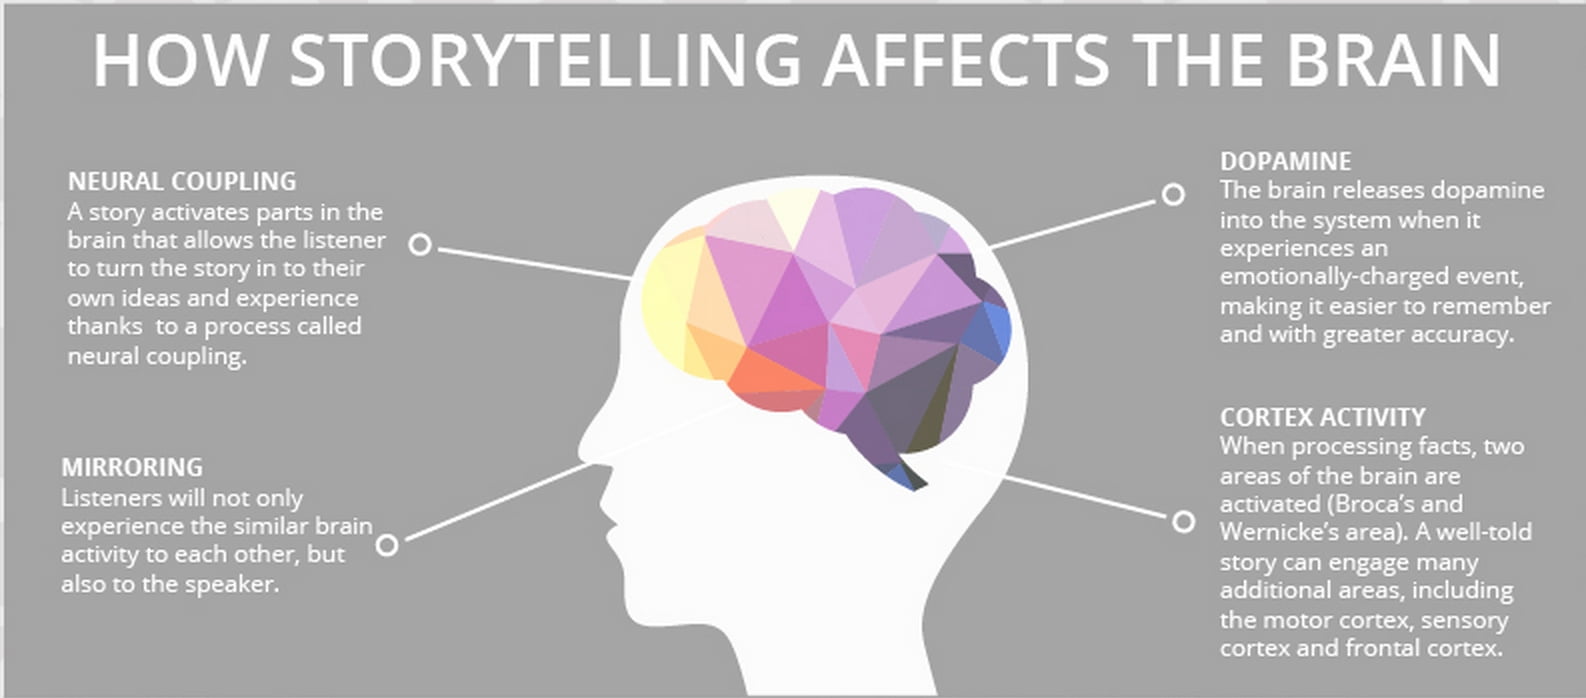 Storytelling and the brain